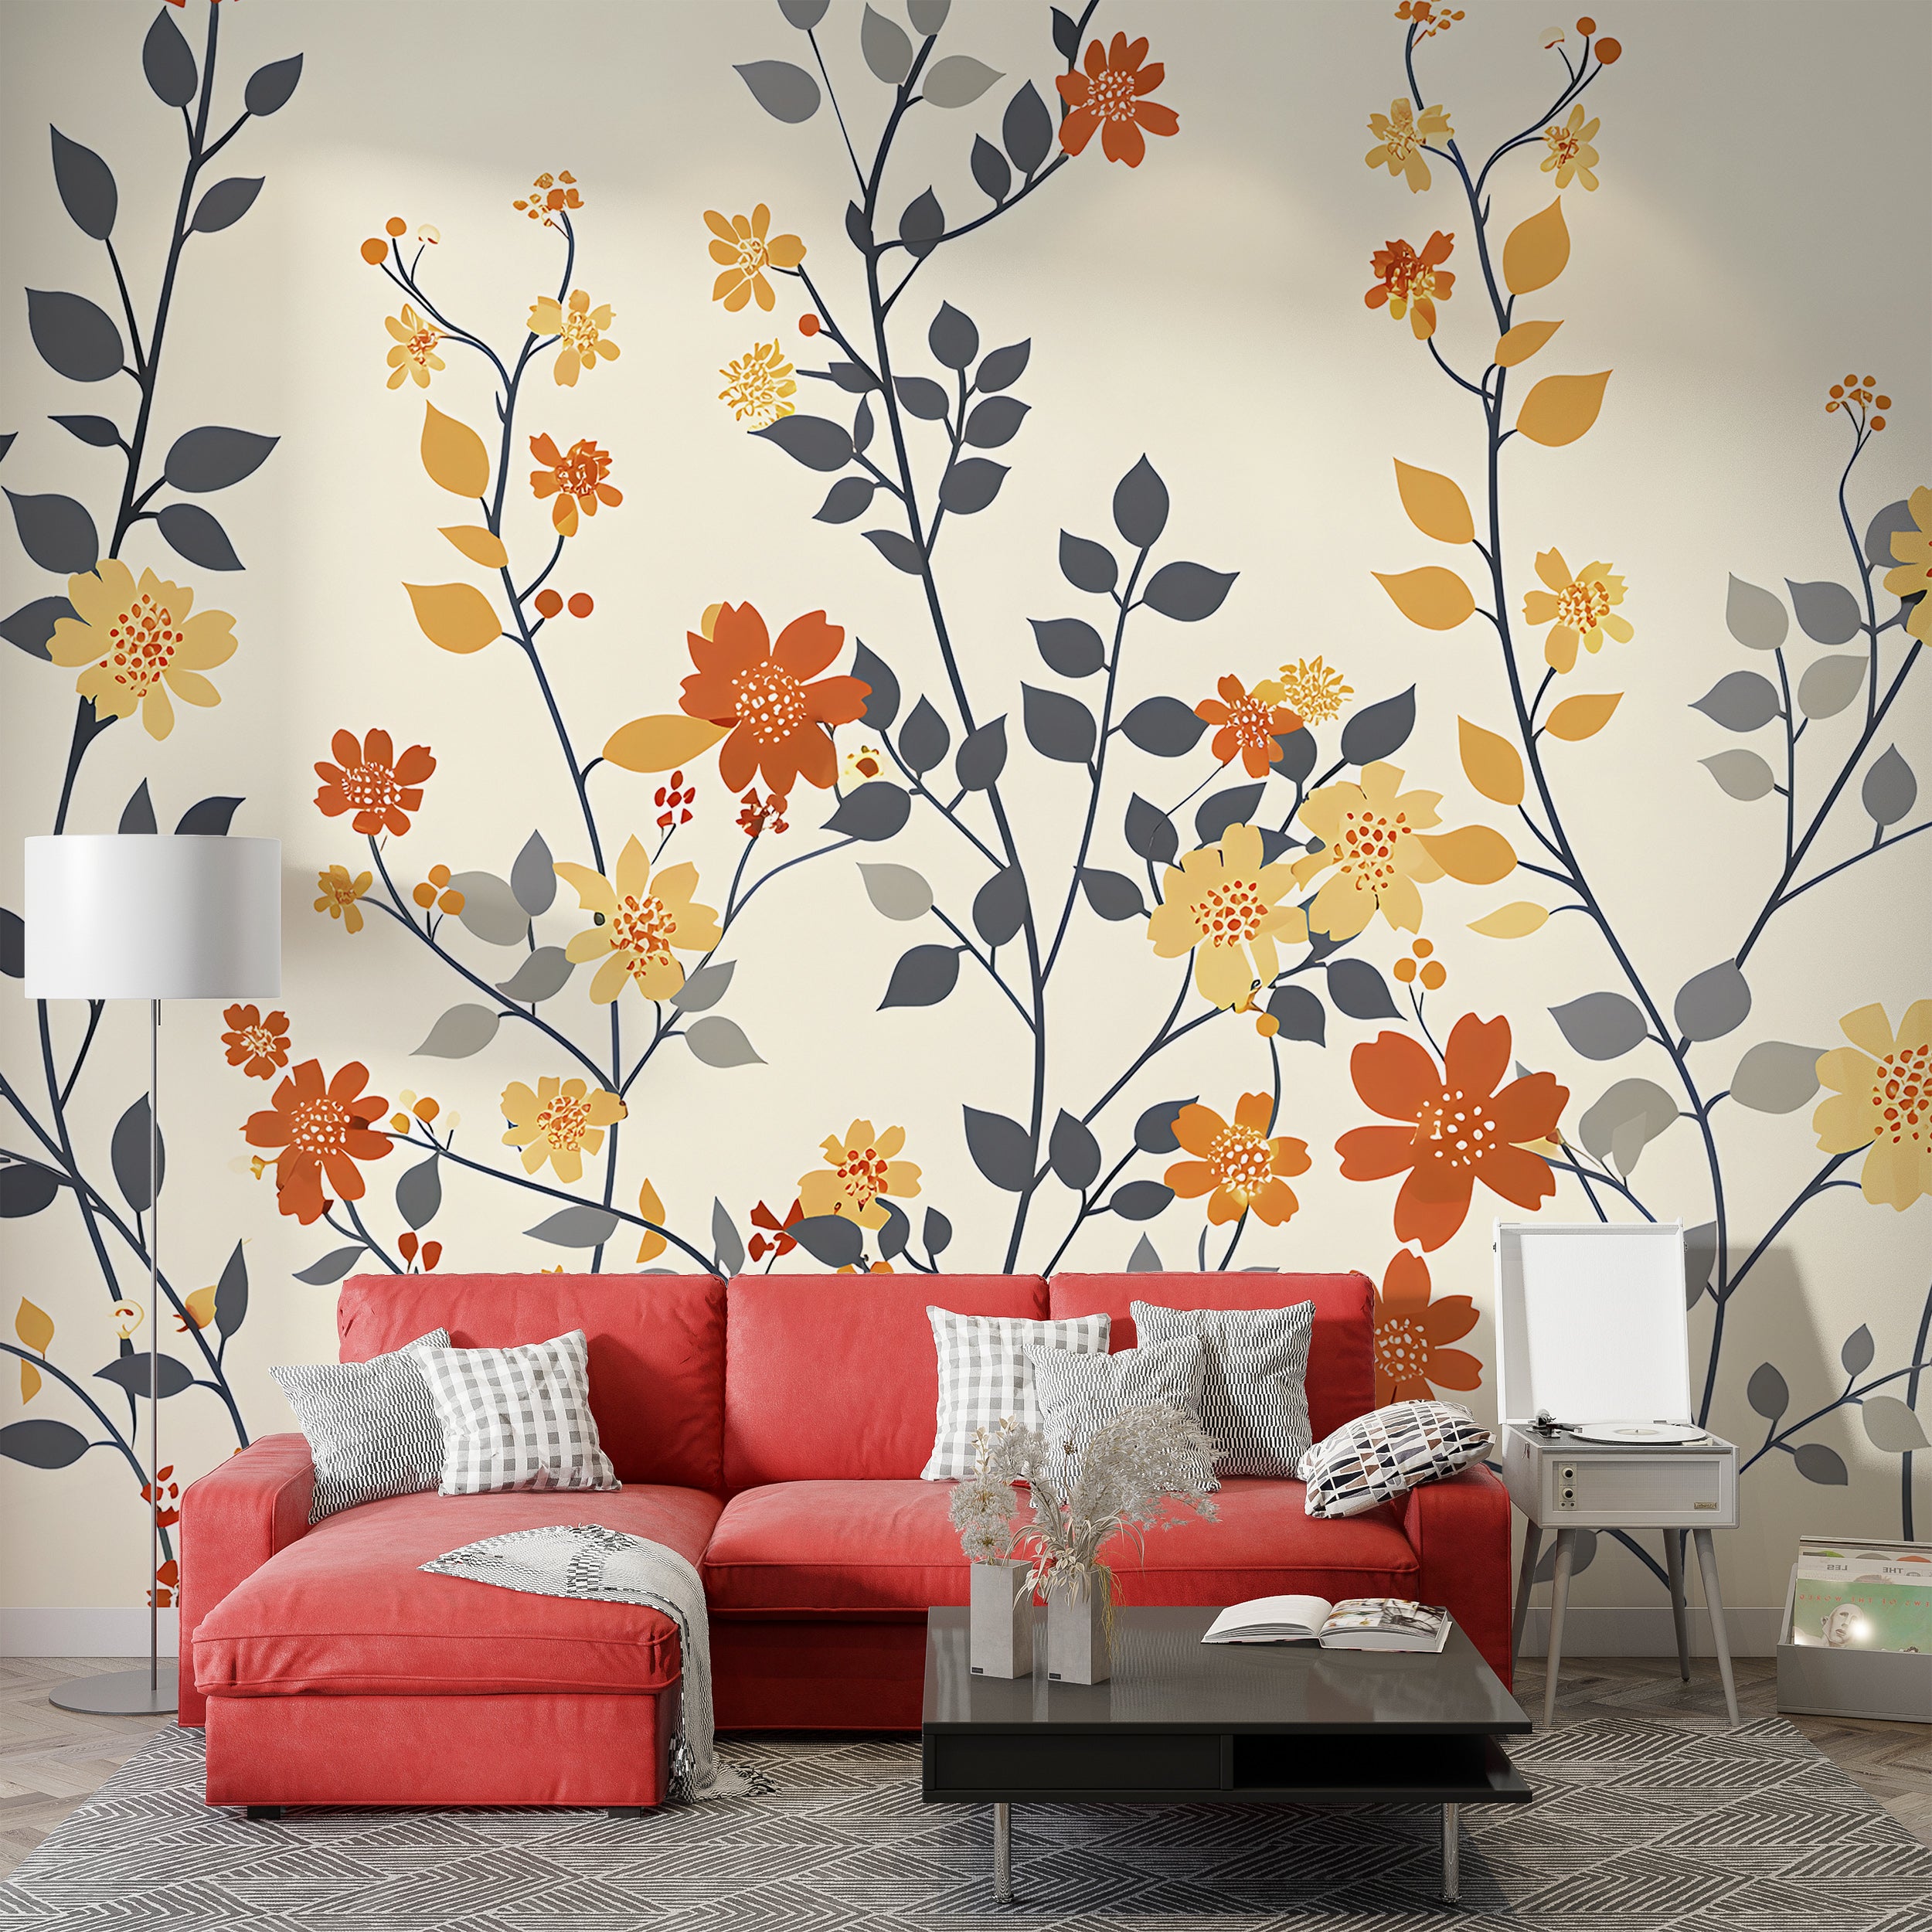 Beige Floral Mural, Red and Yellow Flowers Wallpaper, Self-adhesive Botanical Wall Decal, Removable Pastel Colors Meadow Flower Mural